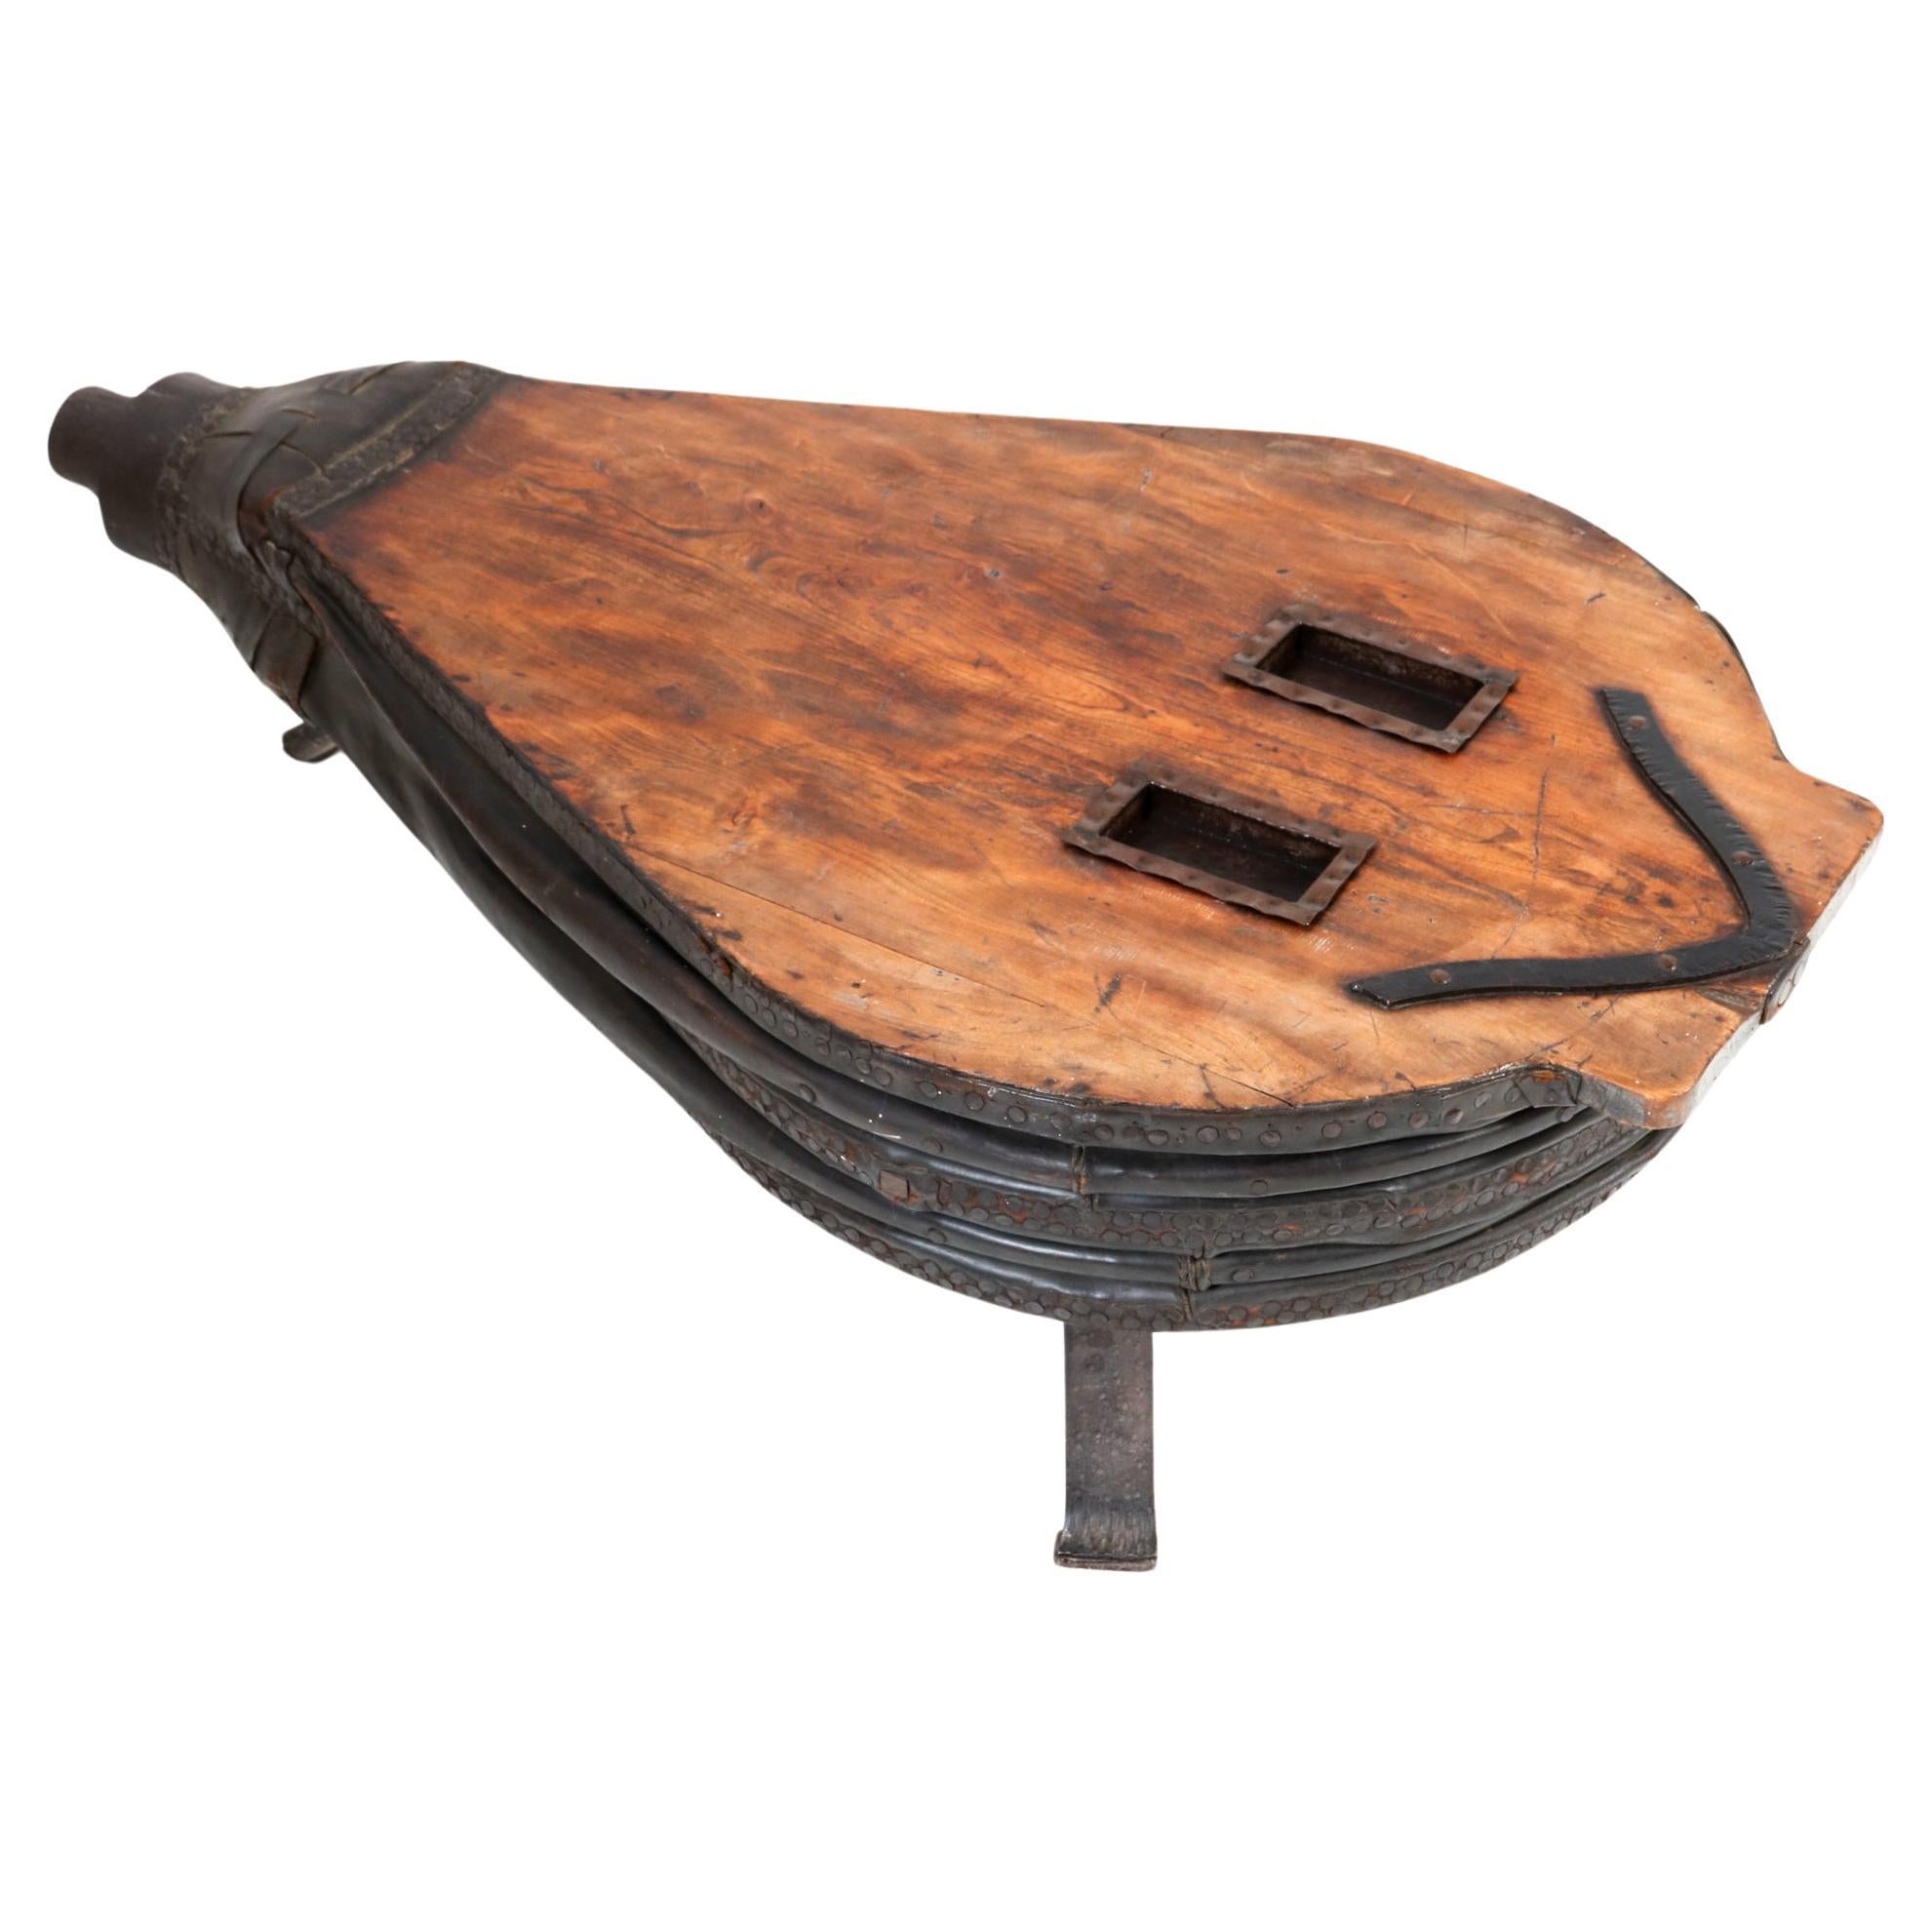  French Provincial Large Fruitwood Blacksmith Forge Bellows Coffee Table, 1860s For Sale